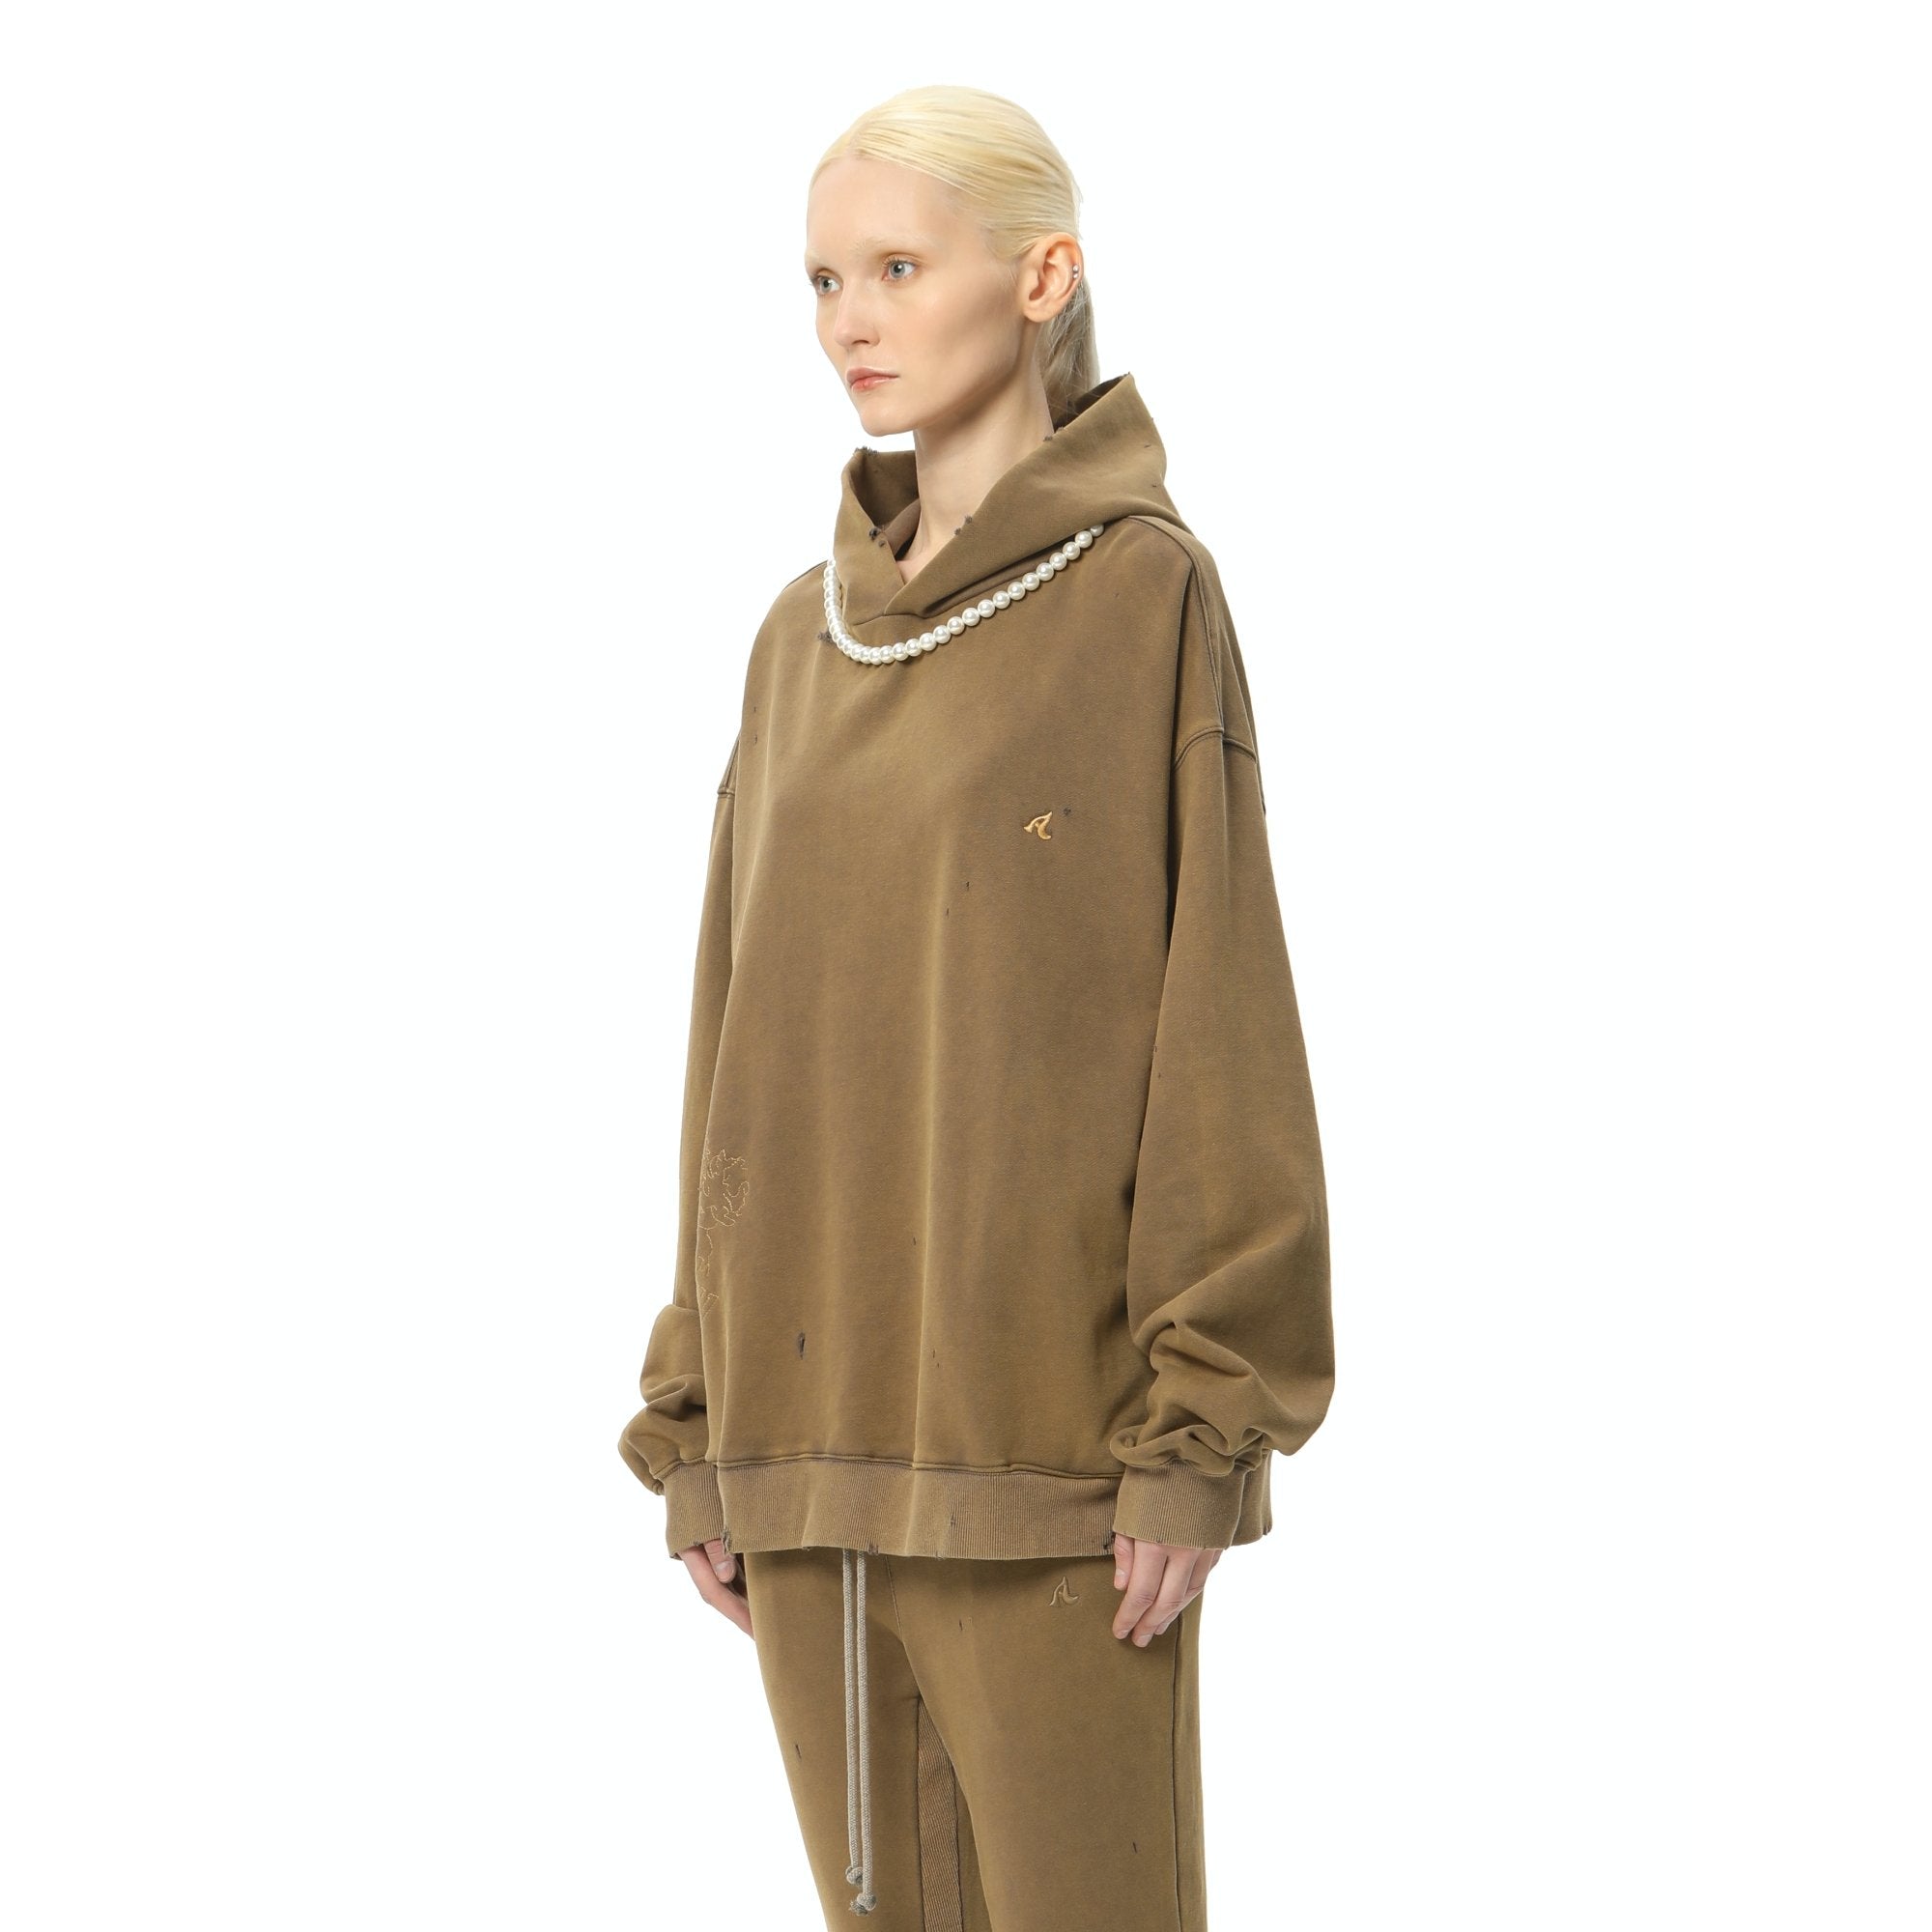 AIN'T SHY Pearl Necklace Hoodie Khaki Brown | MADA IN CHINA